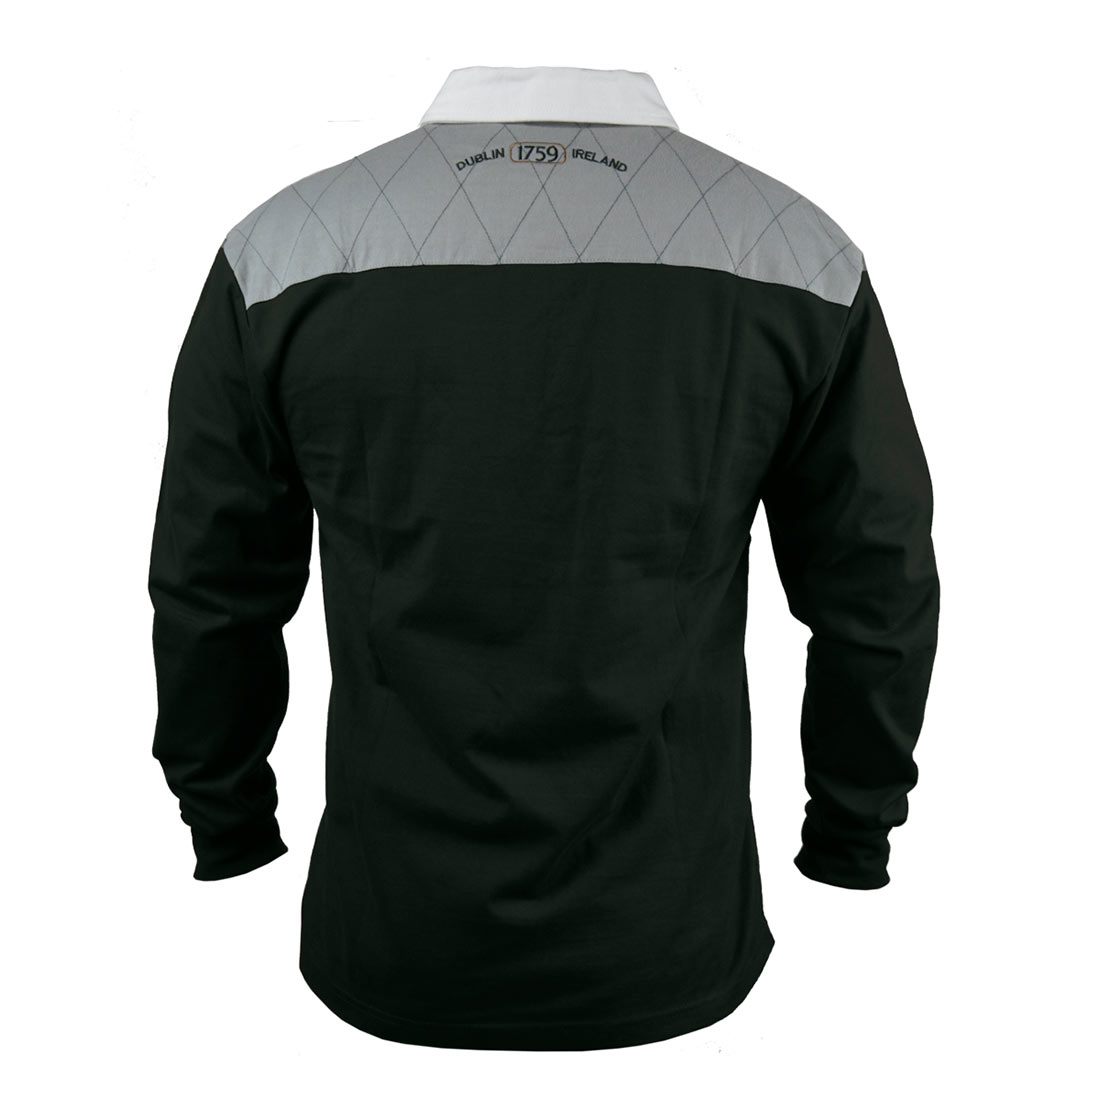 The back view of a Guinness Heritage Charcoal Grey and Black Long Sleeve Rugby Jersey made from 100% cotton by Guinness UK.